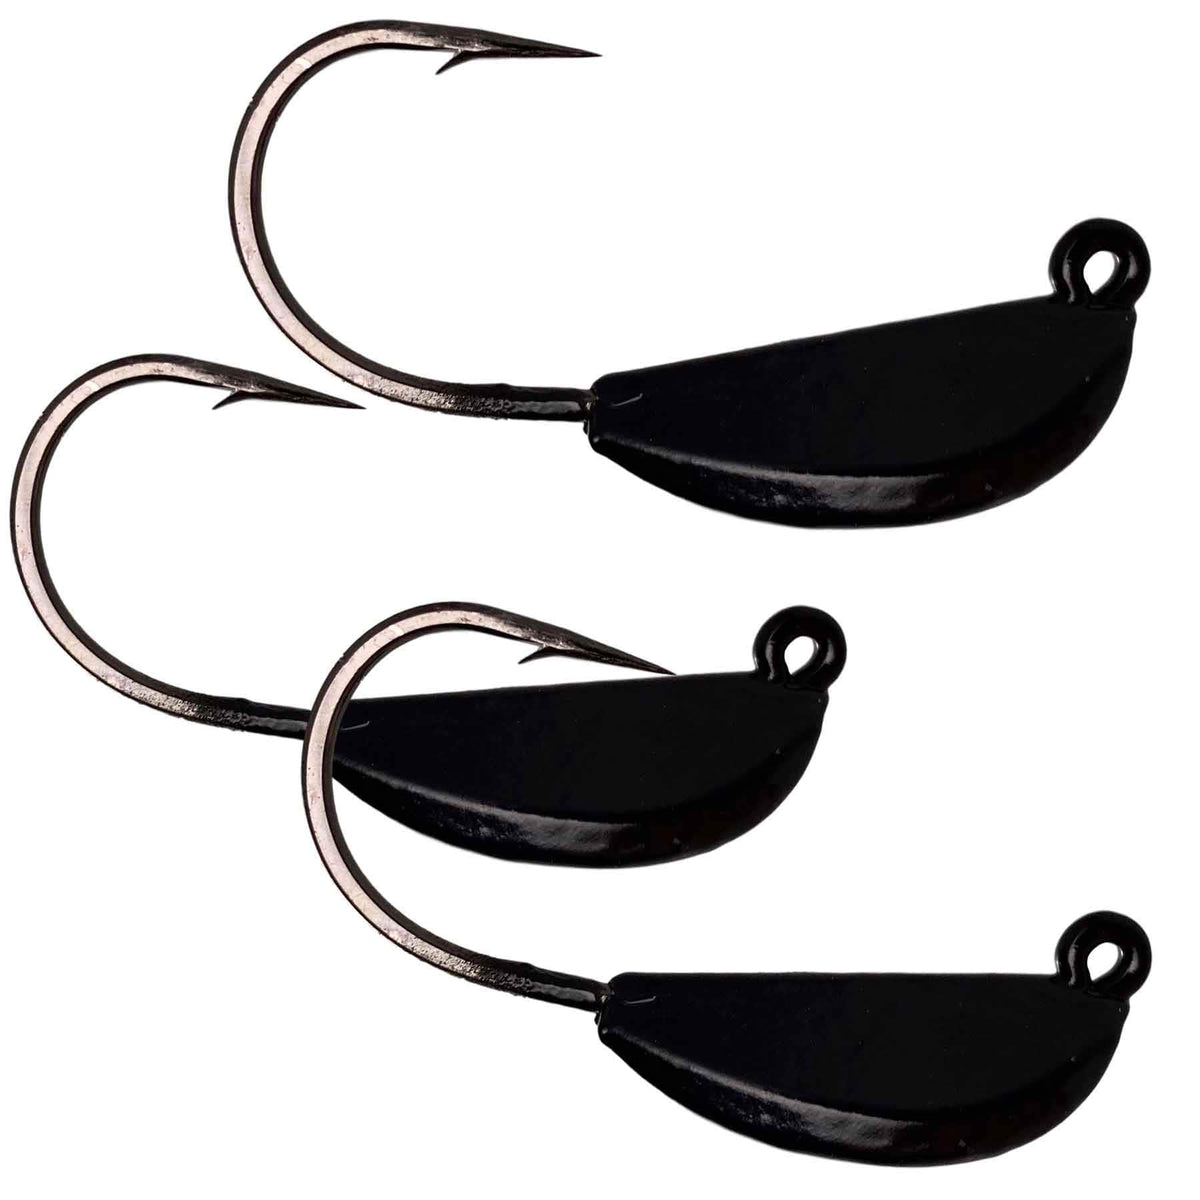 MagicTail Back Bay Tog Jigs (1 Pack)